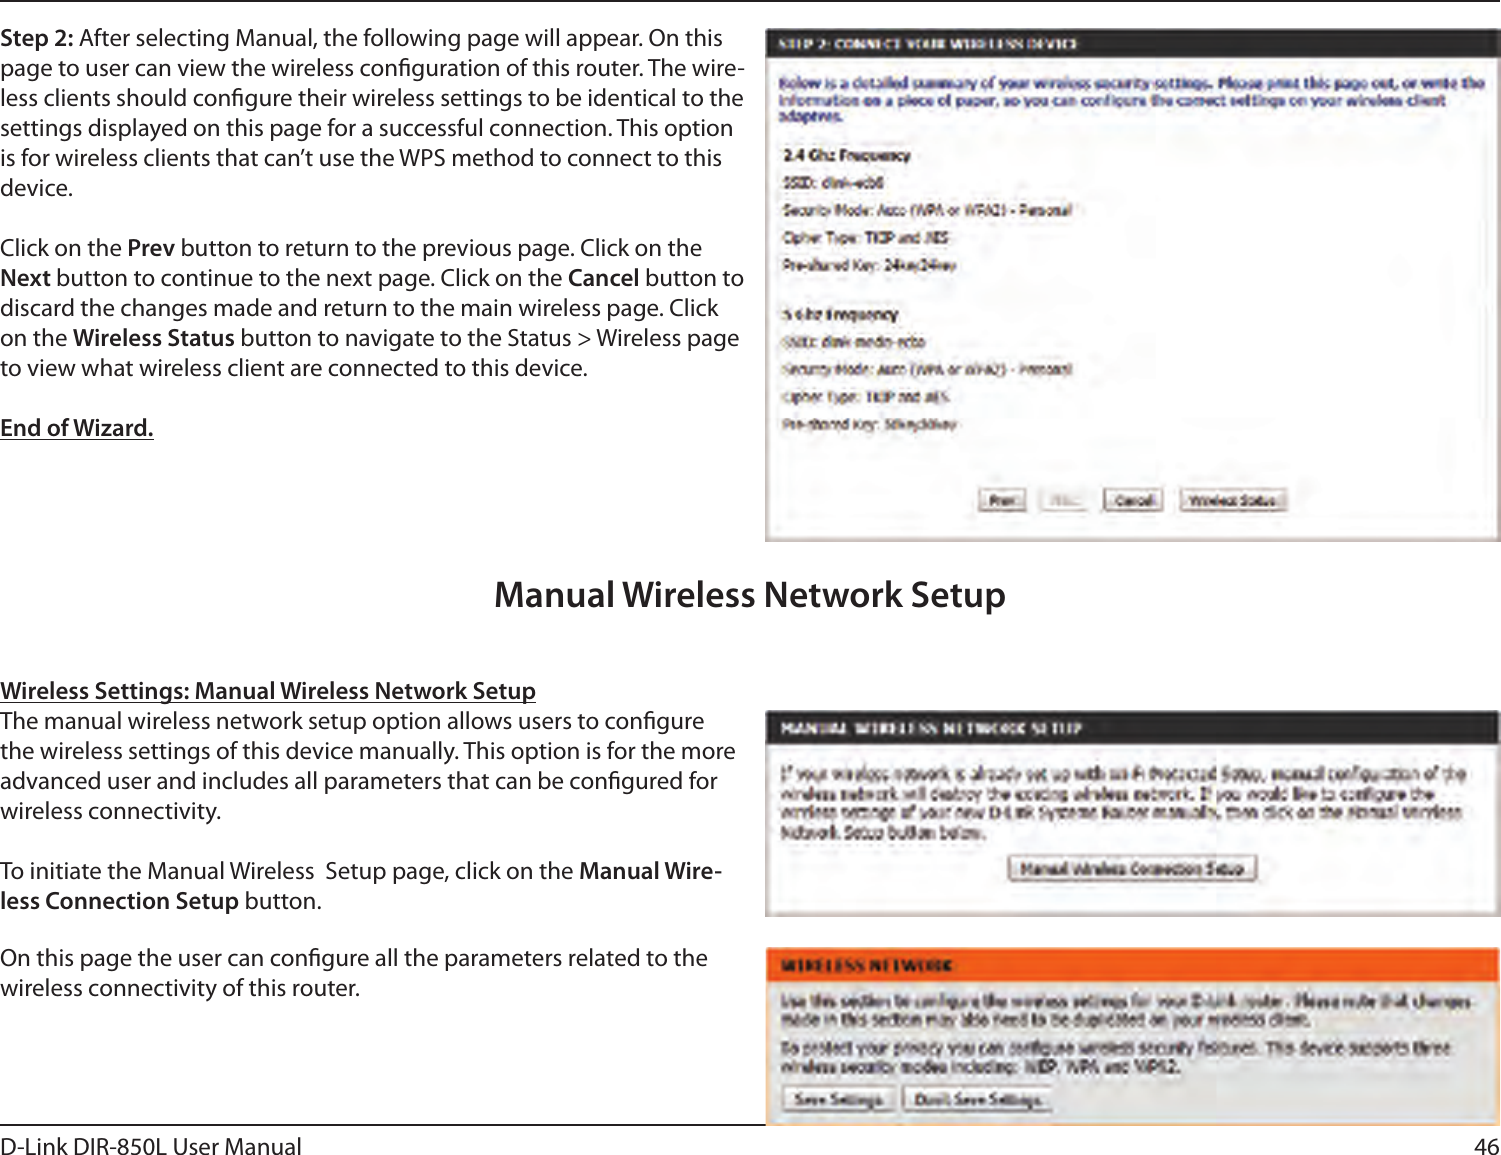 46D-Link DIR-850L User ManualStep 2: After selecting Manual, the following page will appear. On this page to user can view the wireless conguration of this router. The wire-less clients should congure their wireless settings to be identical to the settings displayed on this page for a successful connection. This option is for wireless clients that can’t use the WPS method to connect to this device.Click on the Prev button to return to the previous page. Click on the Next button to continue to the next page. Click on the Cancel button to discard the changes made and return to the main wireless page. Click on the Wireless Status button to navigate to the Status &gt; Wireless page to view what wireless client are connected to this device.End of Wizard.Wireless Settings: Manual Wireless Network SetupThe manual wireless network setup option allows users to congure the wireless settings of this device manually. This option is for the more advanced user and includes all parameters that can be congured for wireless connectivity.To initiate the Manual Wireless  Setup page, click on the Manual Wire-less Connection Setup button.On this page the user can congure all the parameters related to the wireless connectivity of this router.Manual Wireless Network Setup